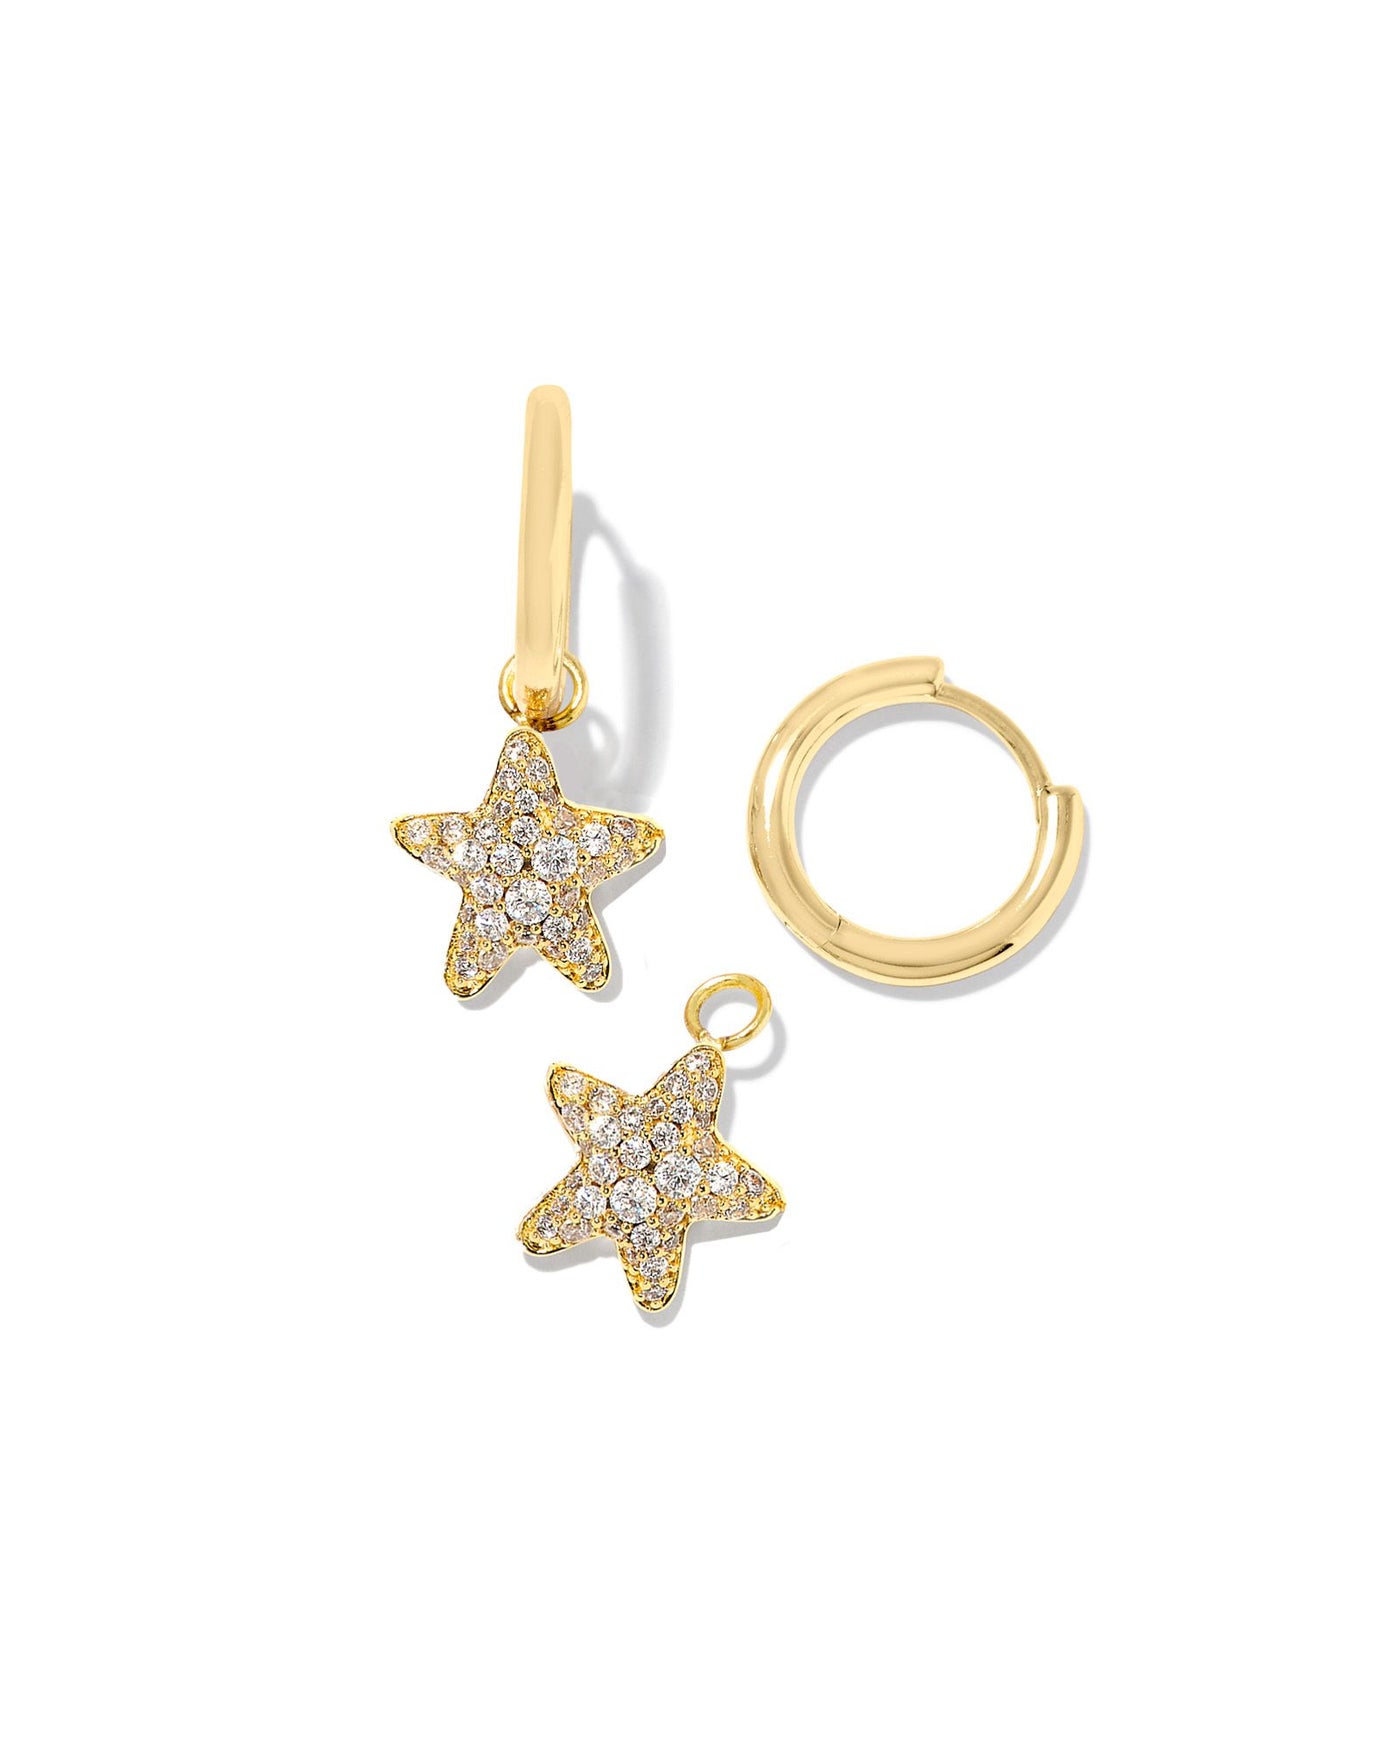 Kendra Scott Jae Star Pave Huggies in Gold White Crystal with star charm detached.